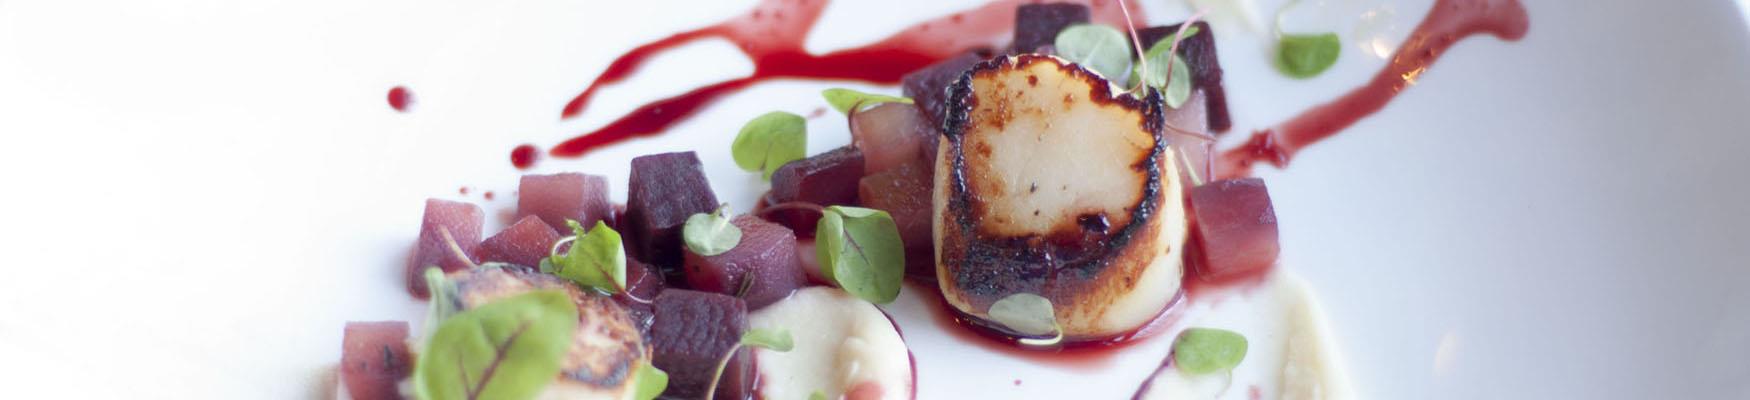 Rye Bay Scallops served artily on plate